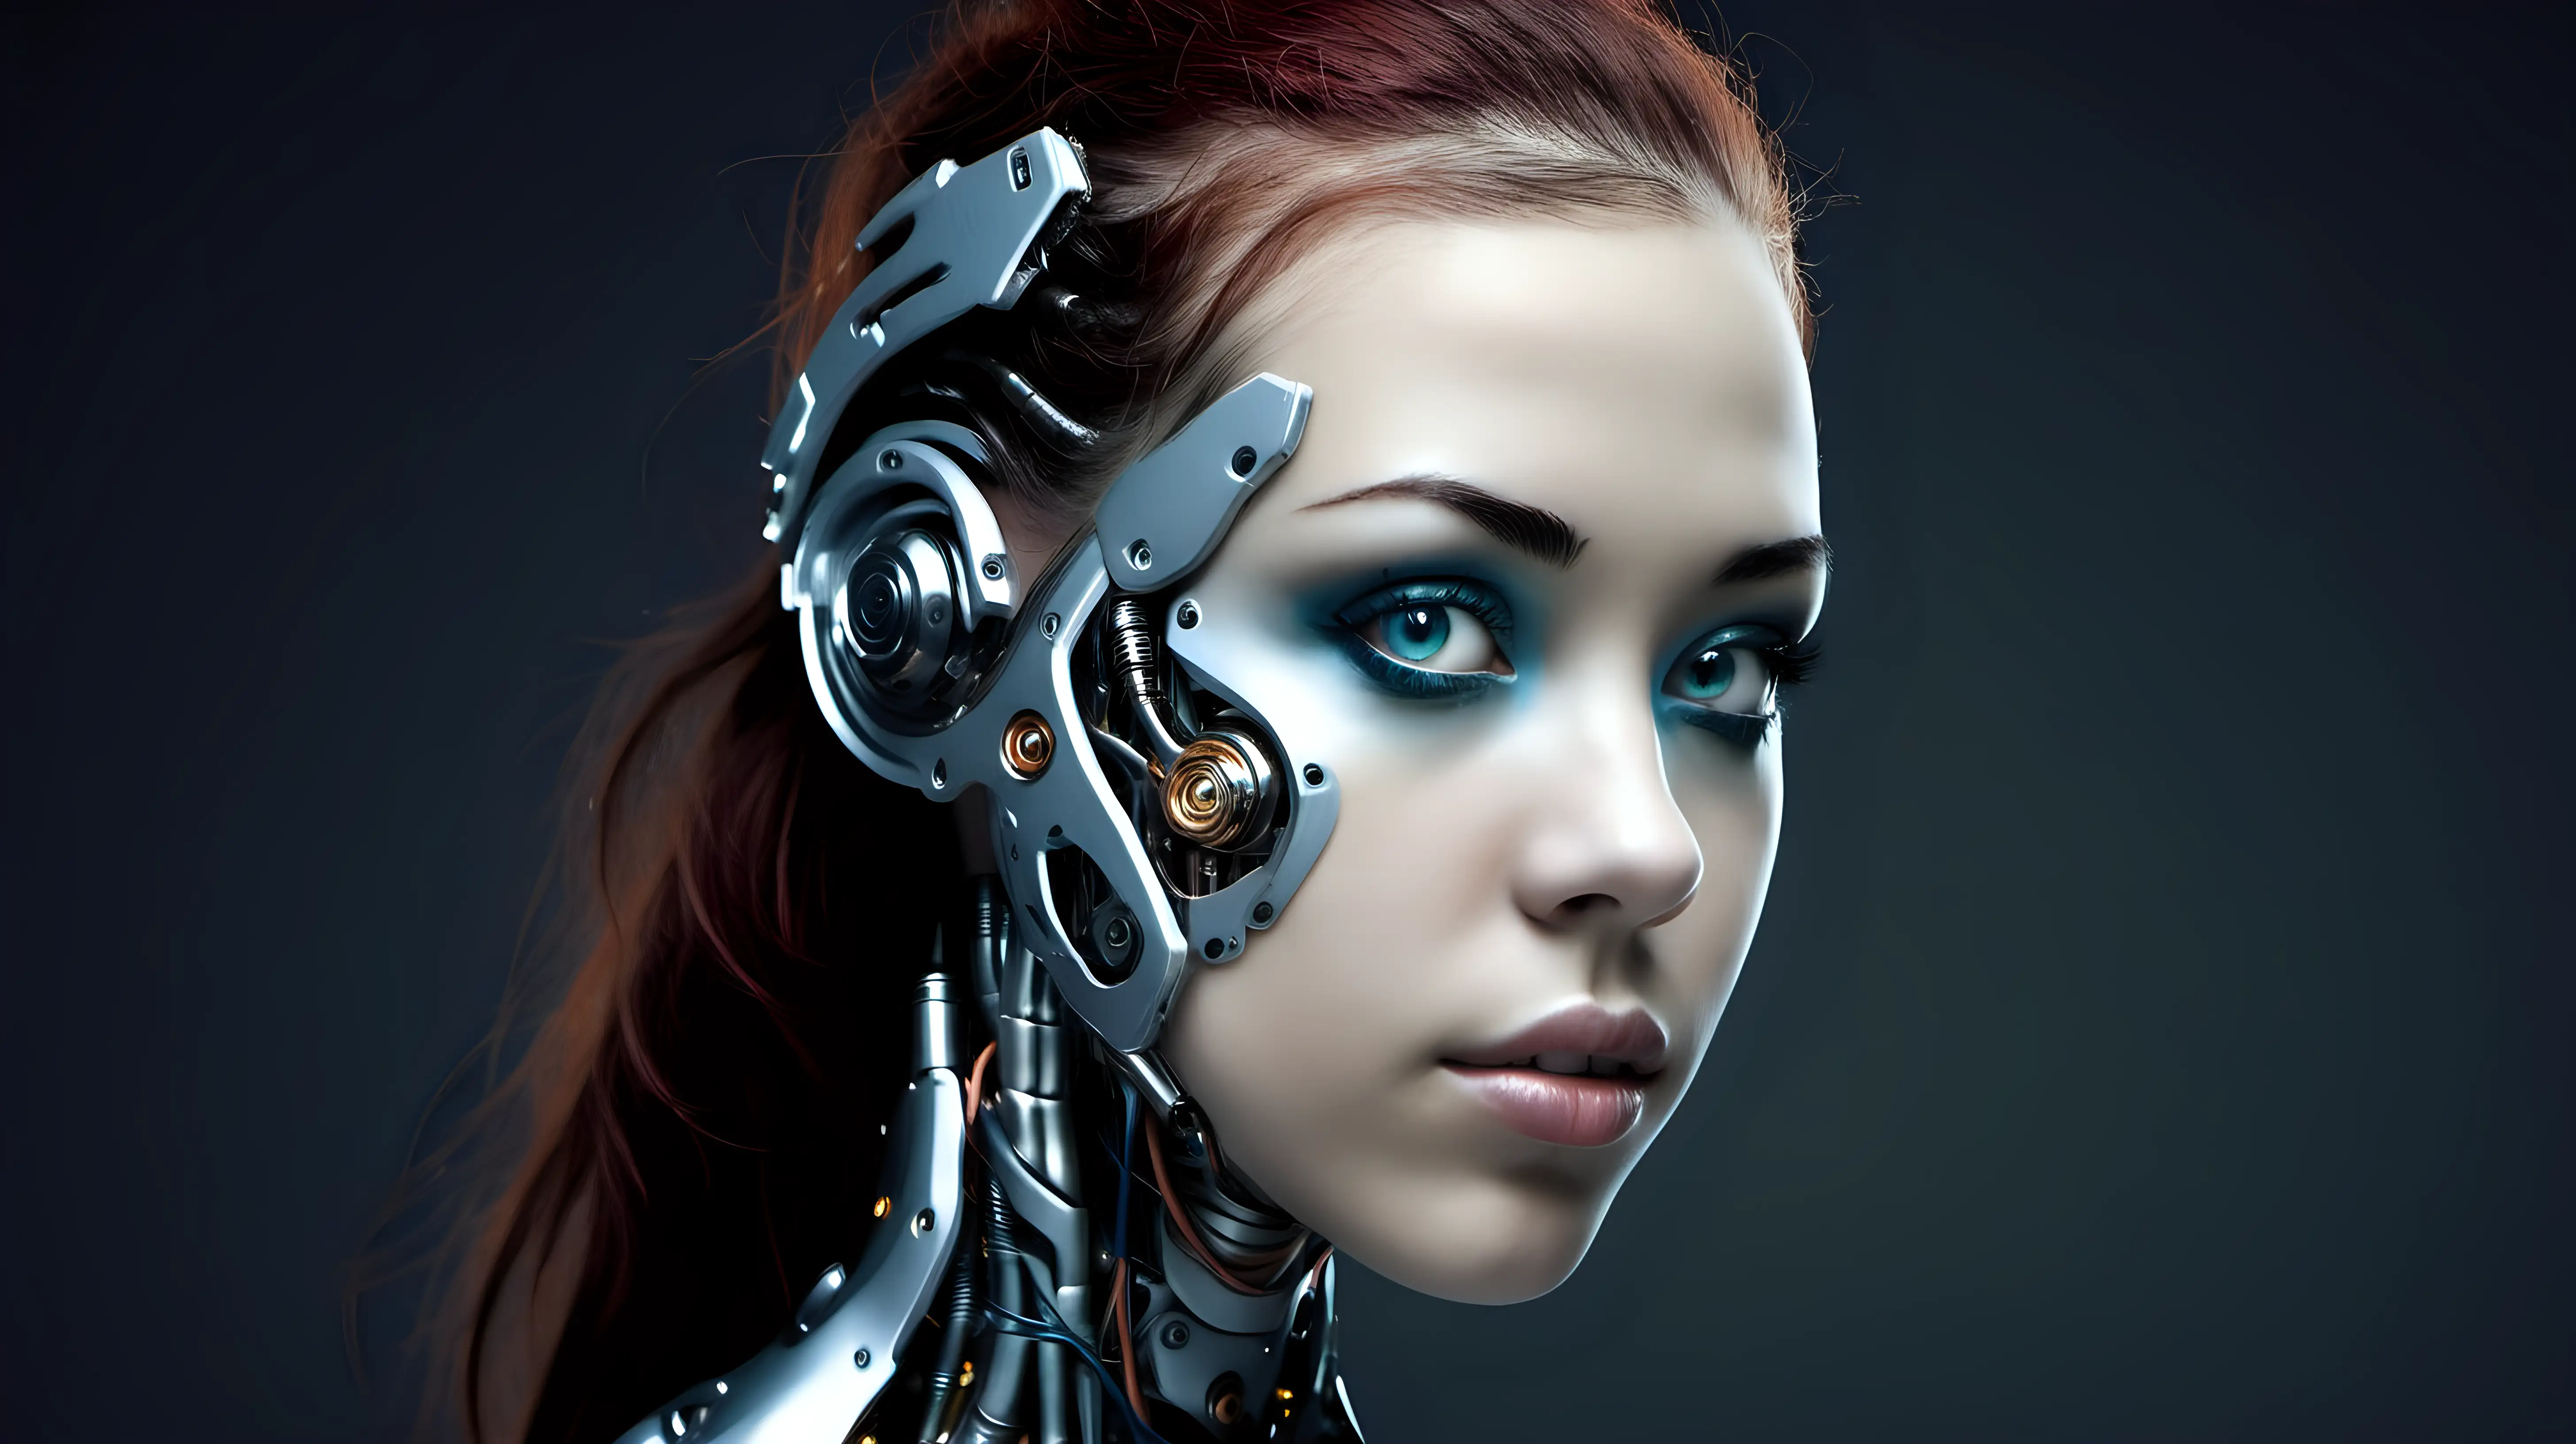 Cyborg woman, 18 years old. She has a cyborg face, but she is extremely beautiful.